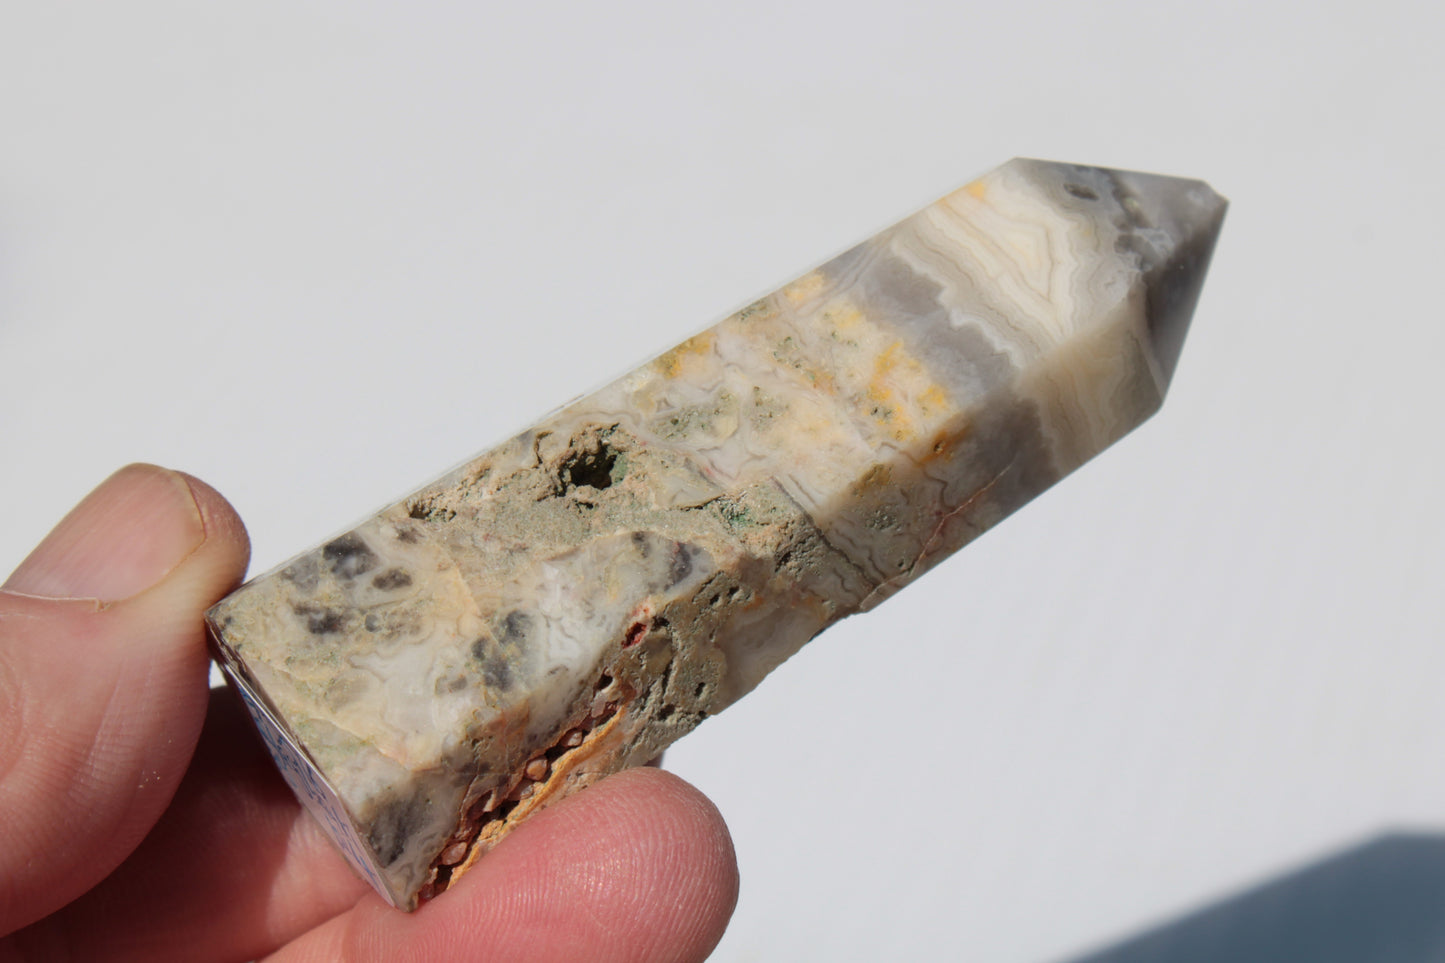 Marquise Claybank Crazy Lace Agate wand 59g